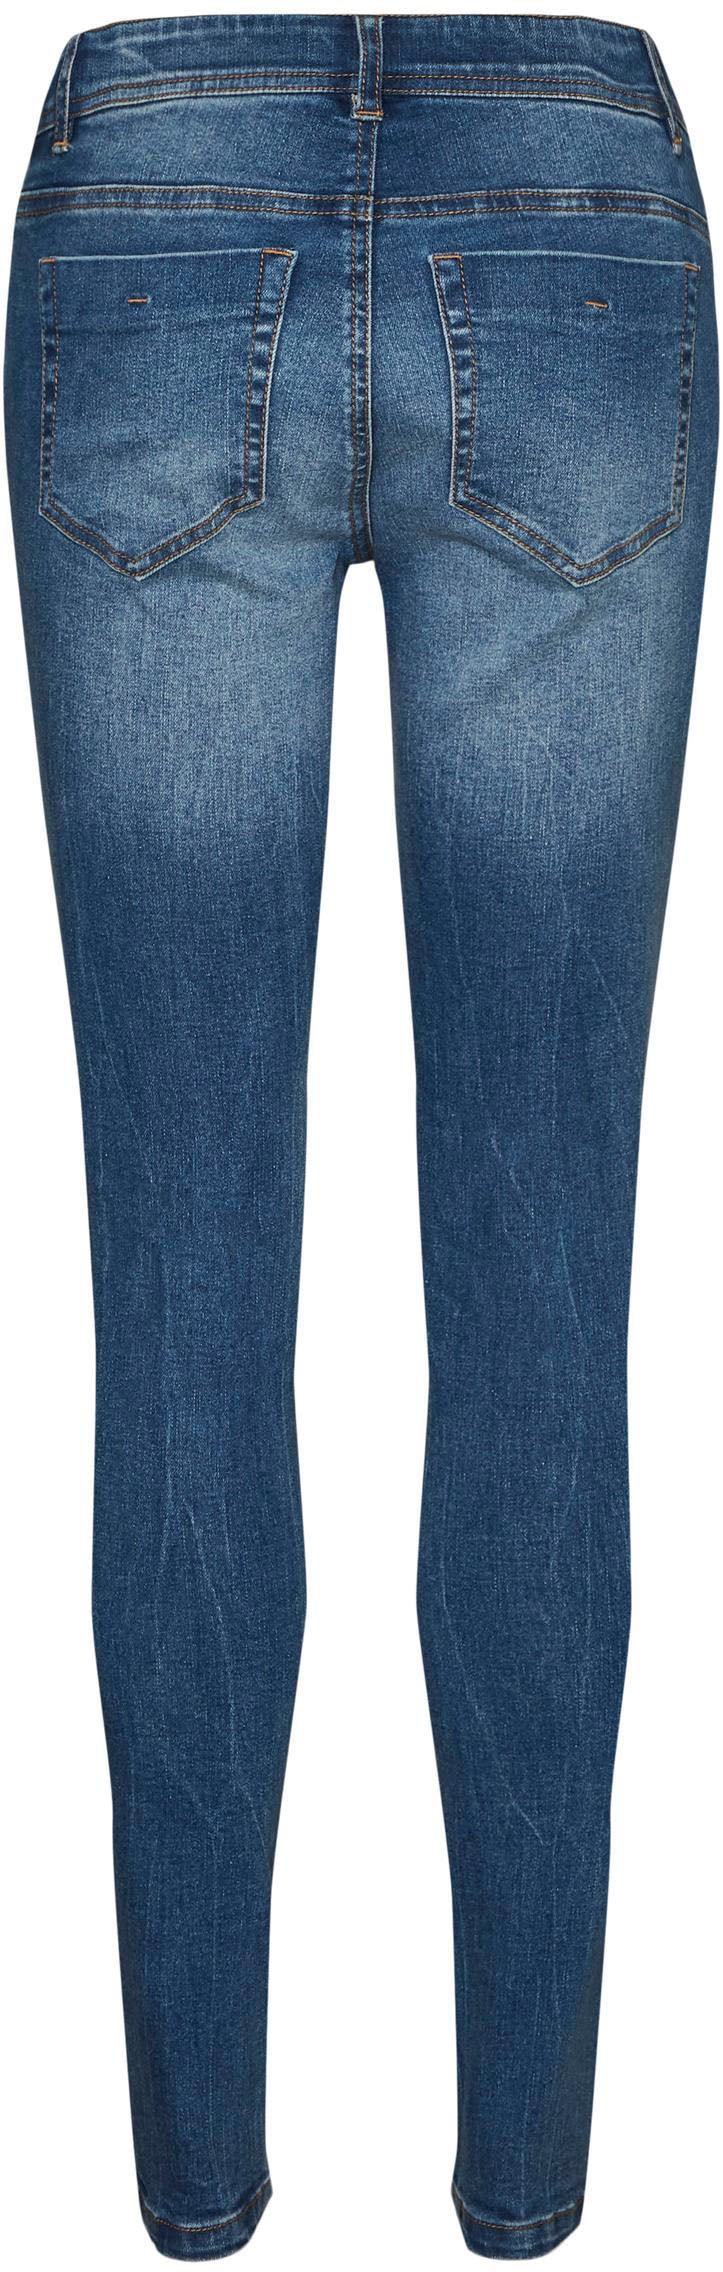 Mamalicious Slim-fit-Jeans »MLEVANS SLIM JEANS W. ELASTIC« bei OTTOversand | Stretchjeans